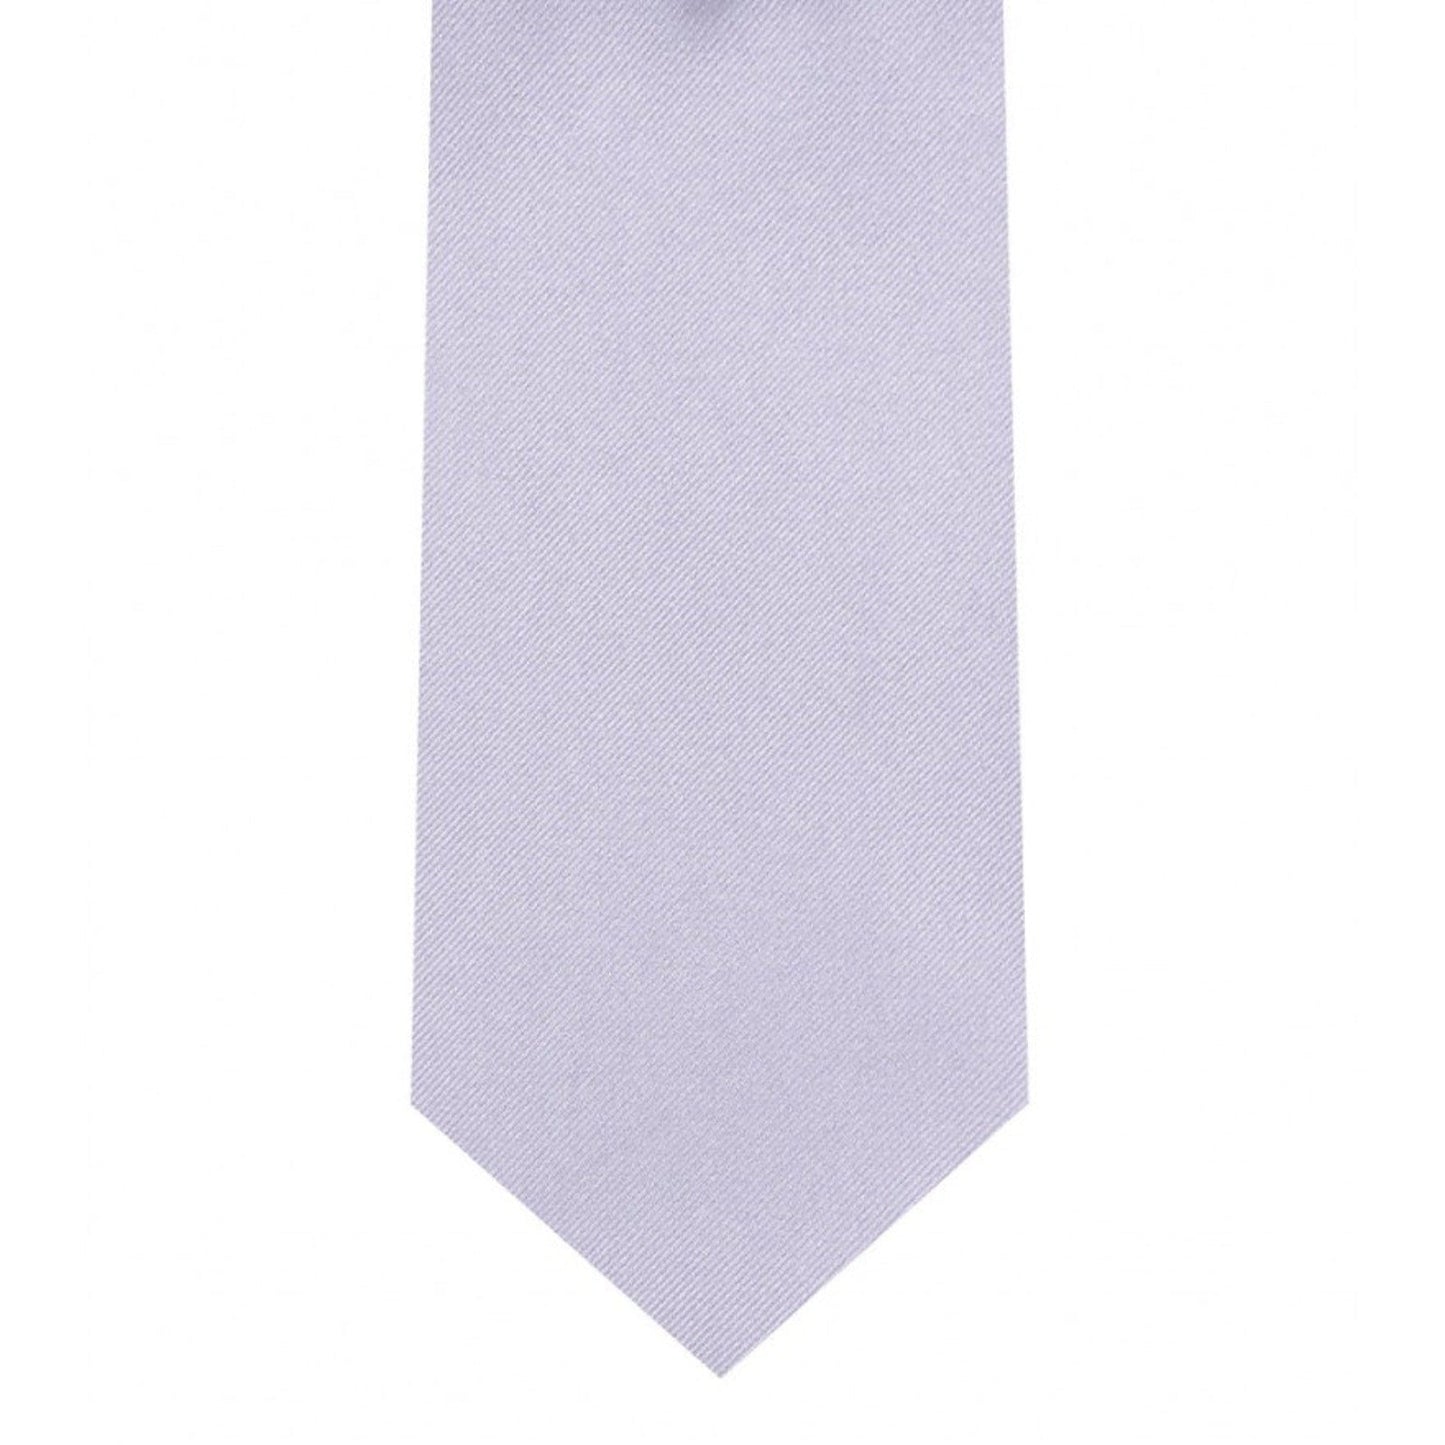 Classic Light Lilac Tie Skinny width 2.75 inches With Matching Pocket Square | KCT Menswear